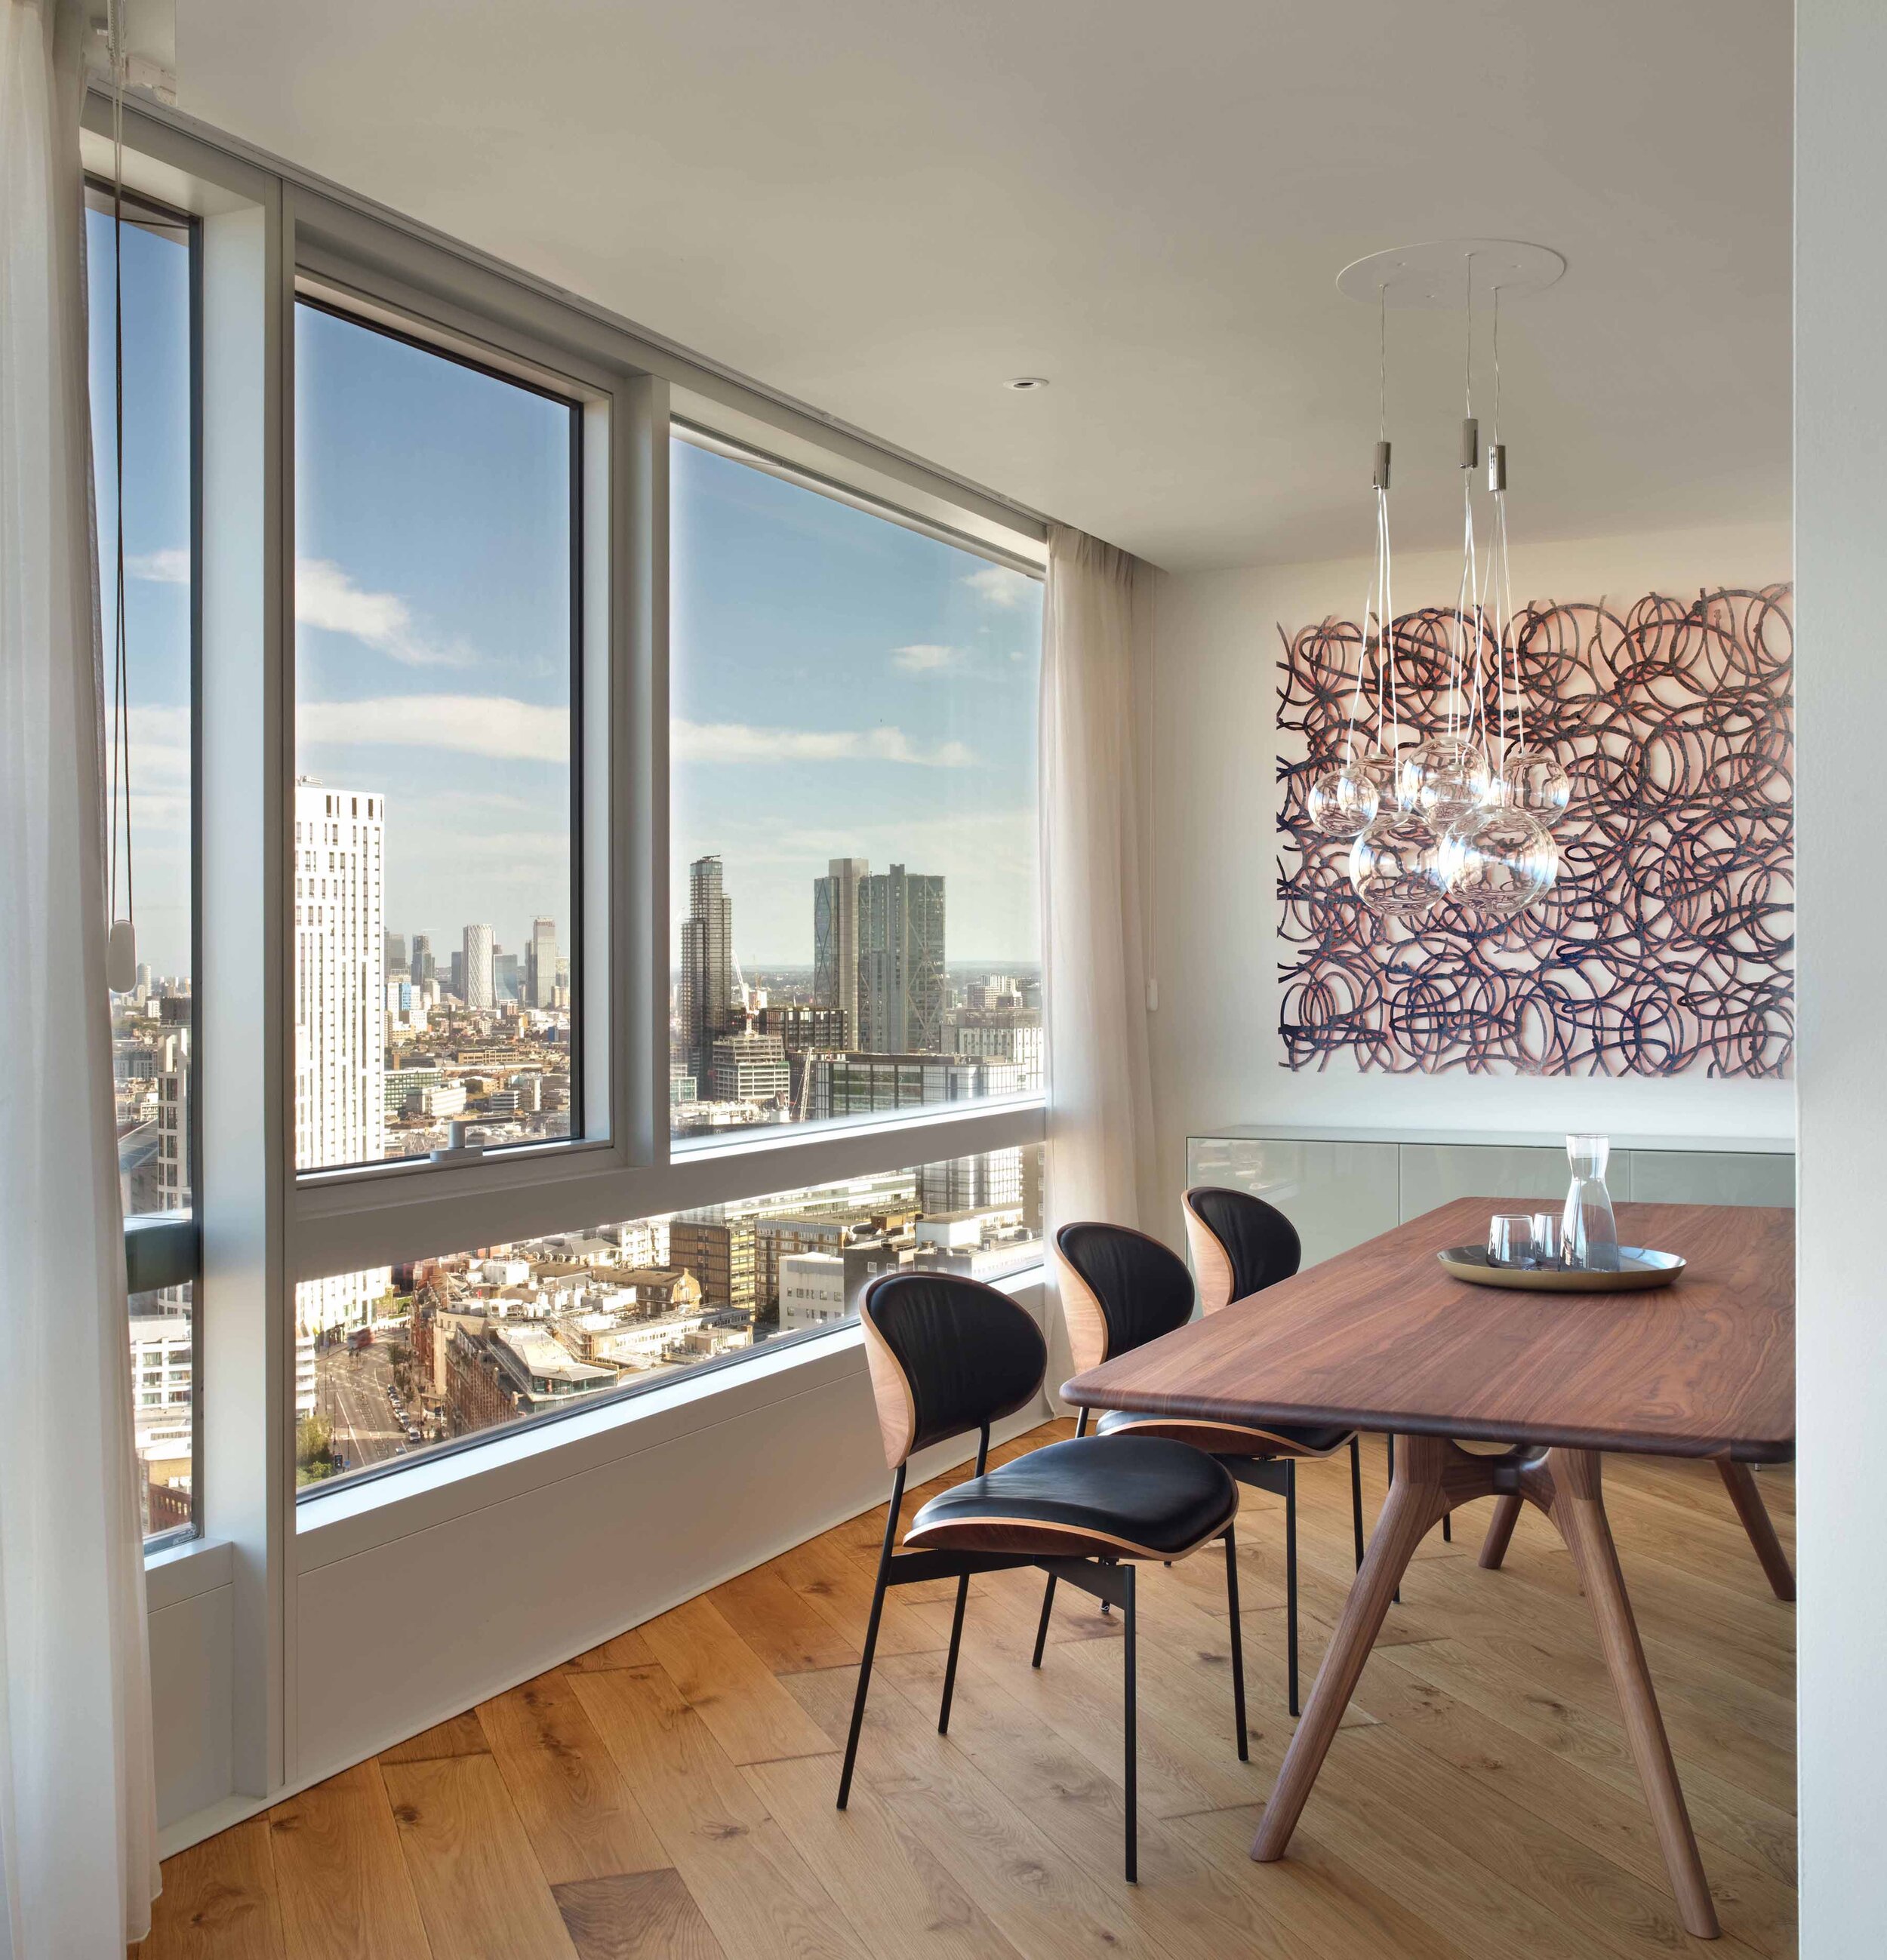 WOMO Architects London Canaletto Interior Apartments Dining Room